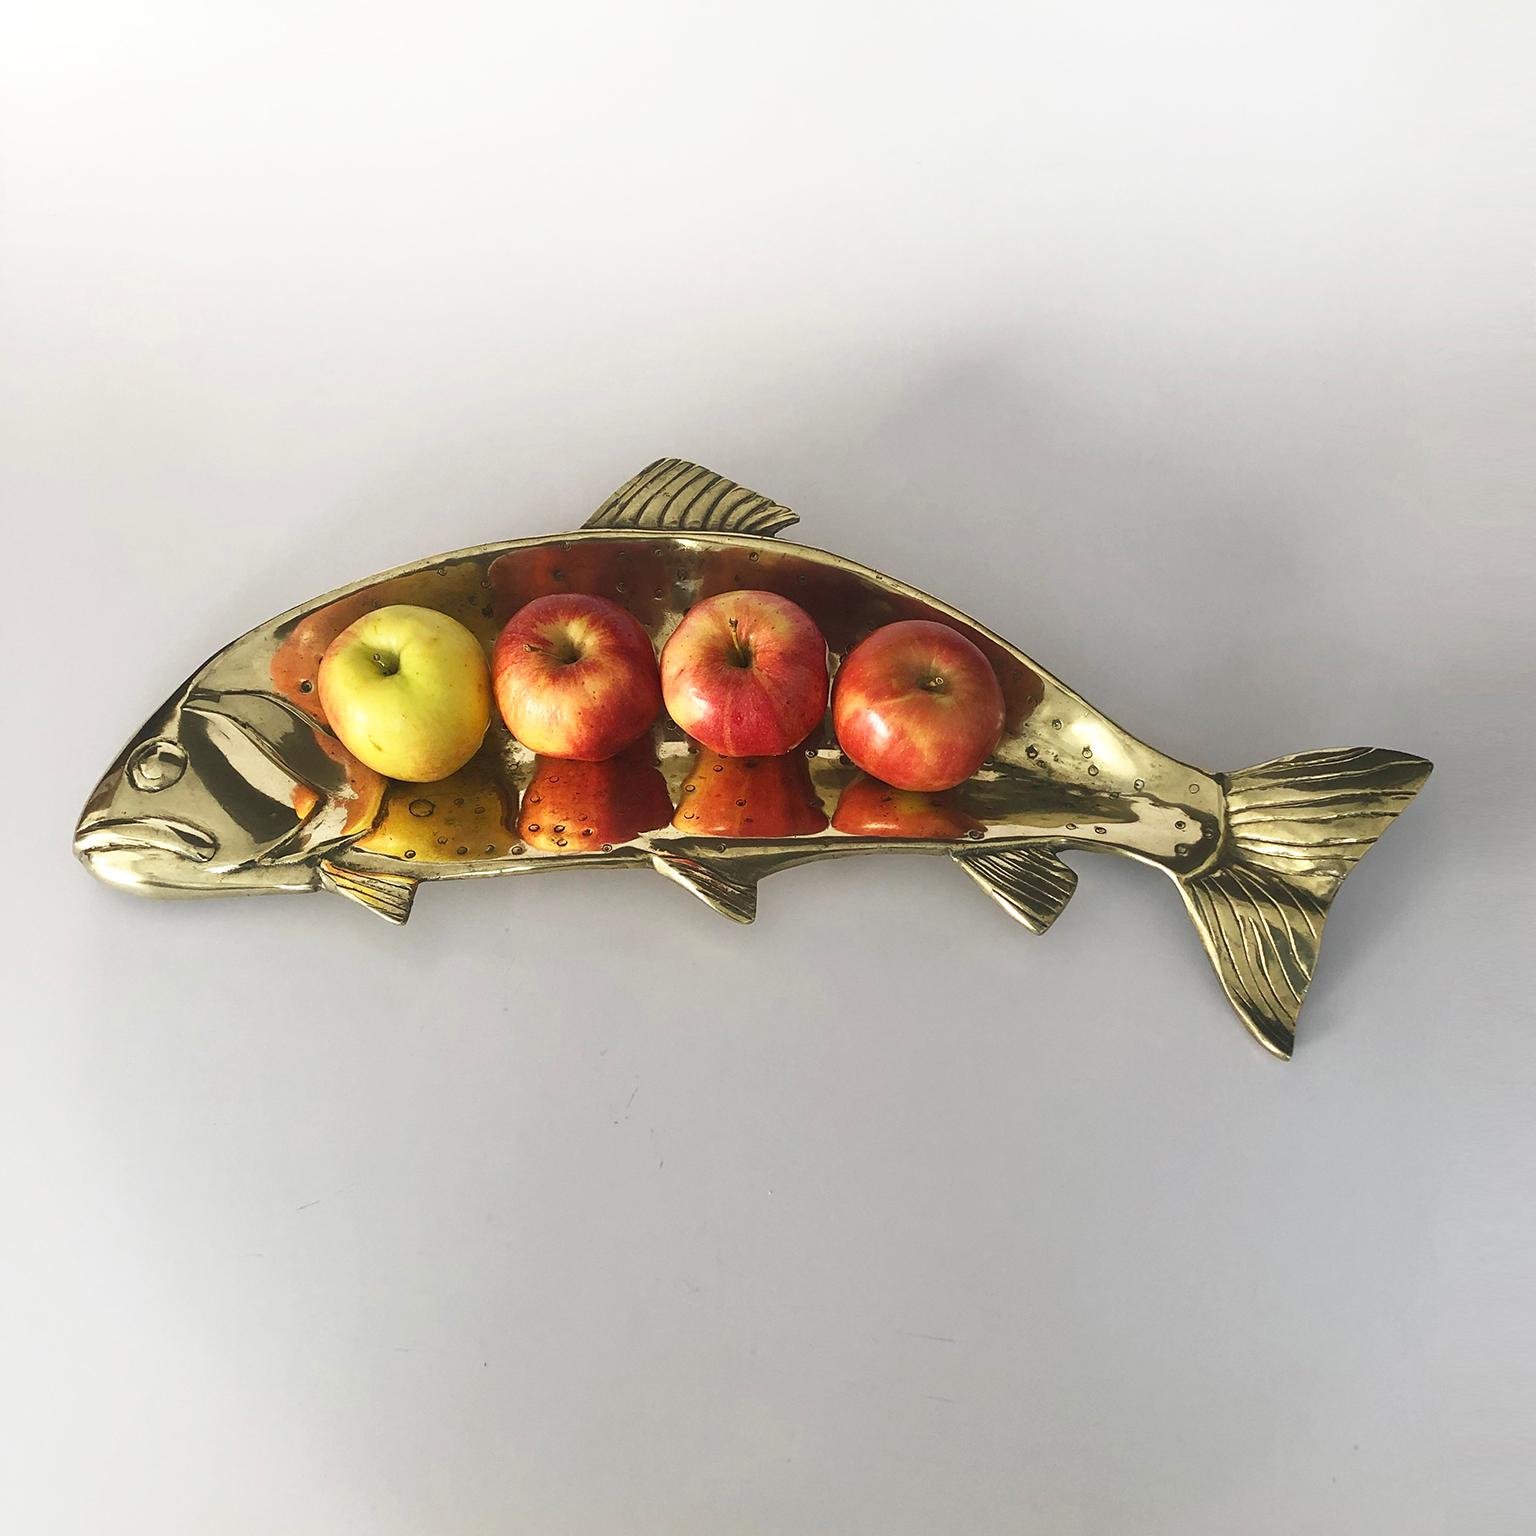 Mexican Vintage Fish Serving Tray, in Solid Brass